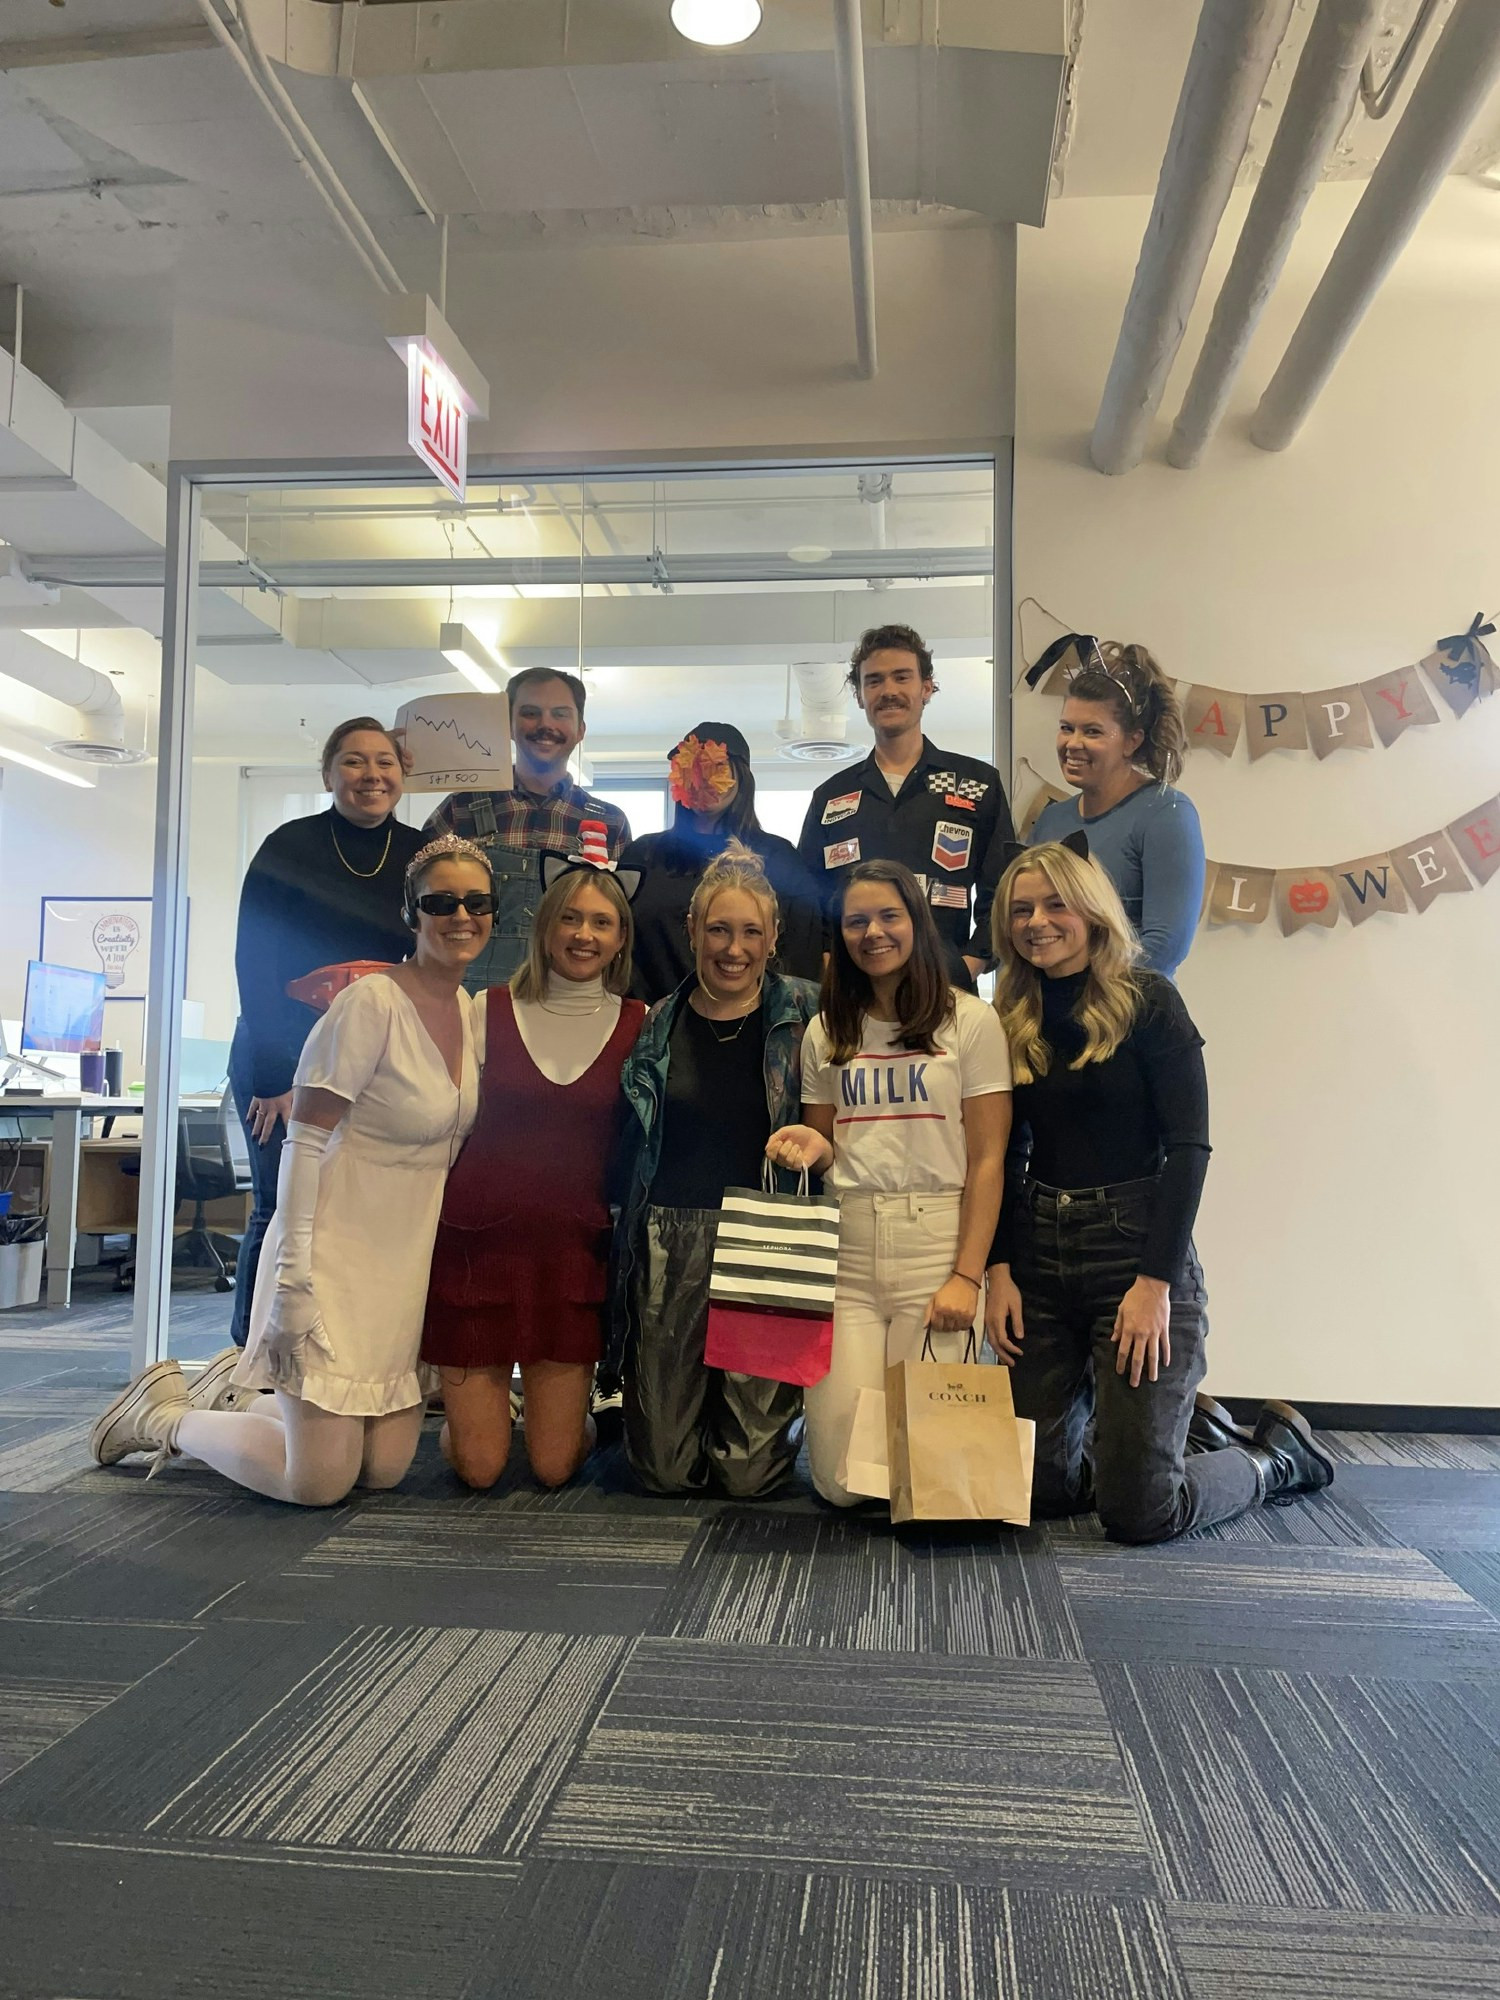 Next PR’s Chicago team celebrates the agency’s favorite holiday, Halloween, with pun-themed costumes, games and treats.